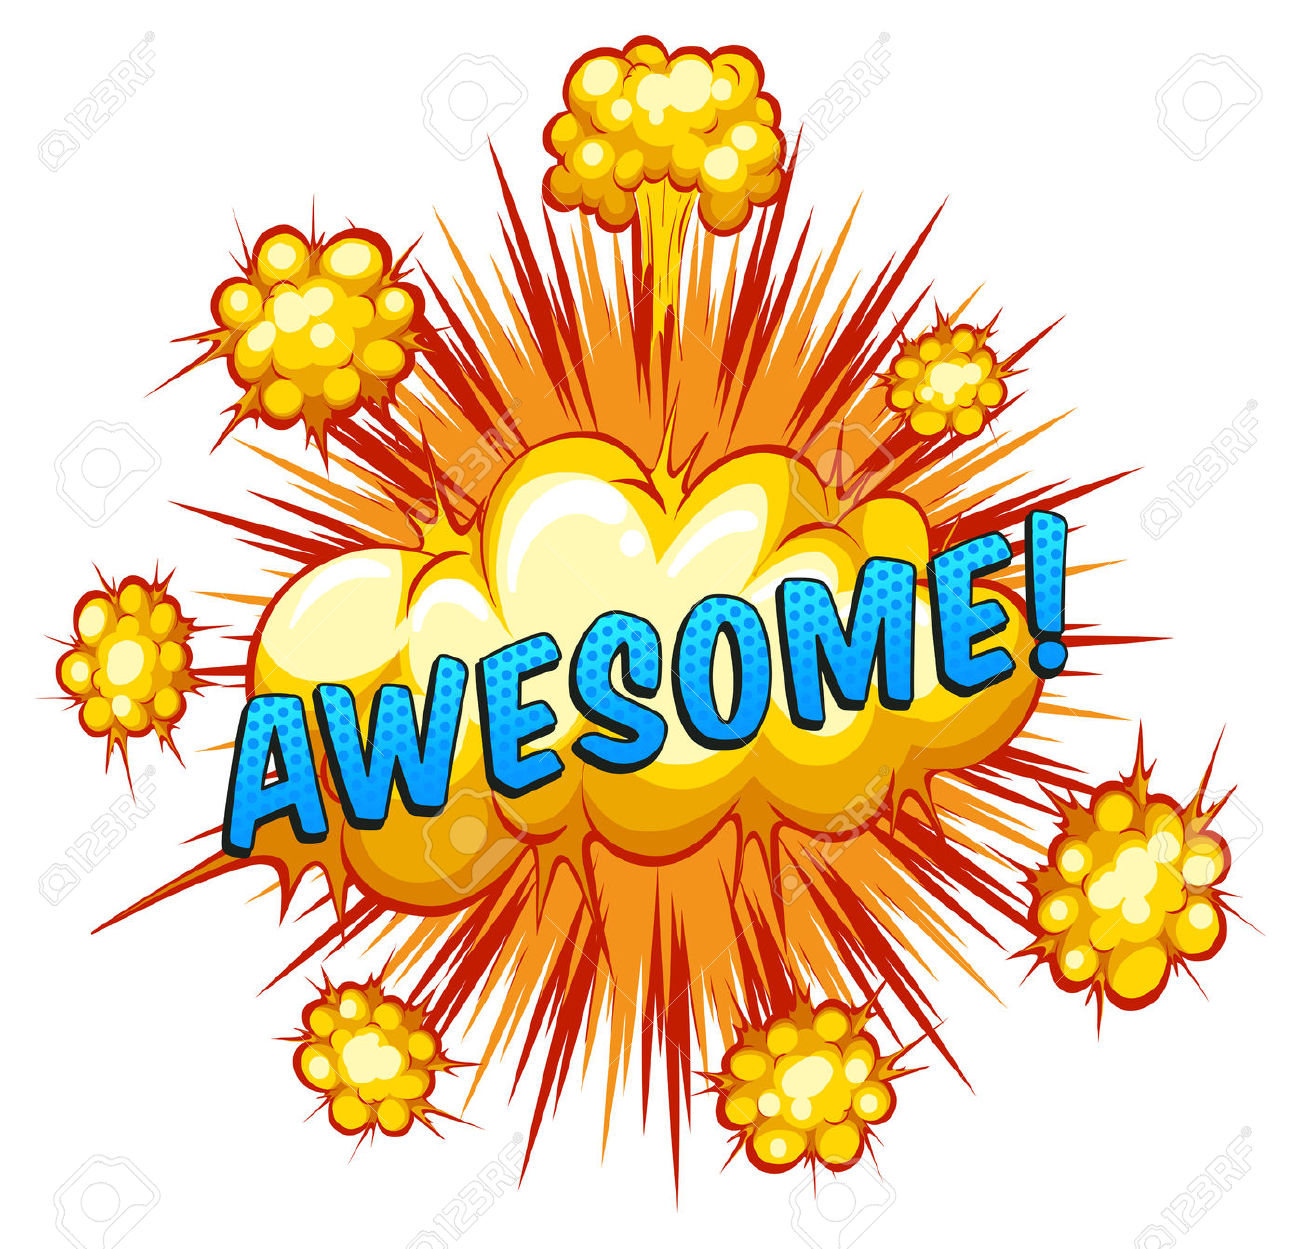 Awesome Job Clipart | Free download on ClipArtMag
